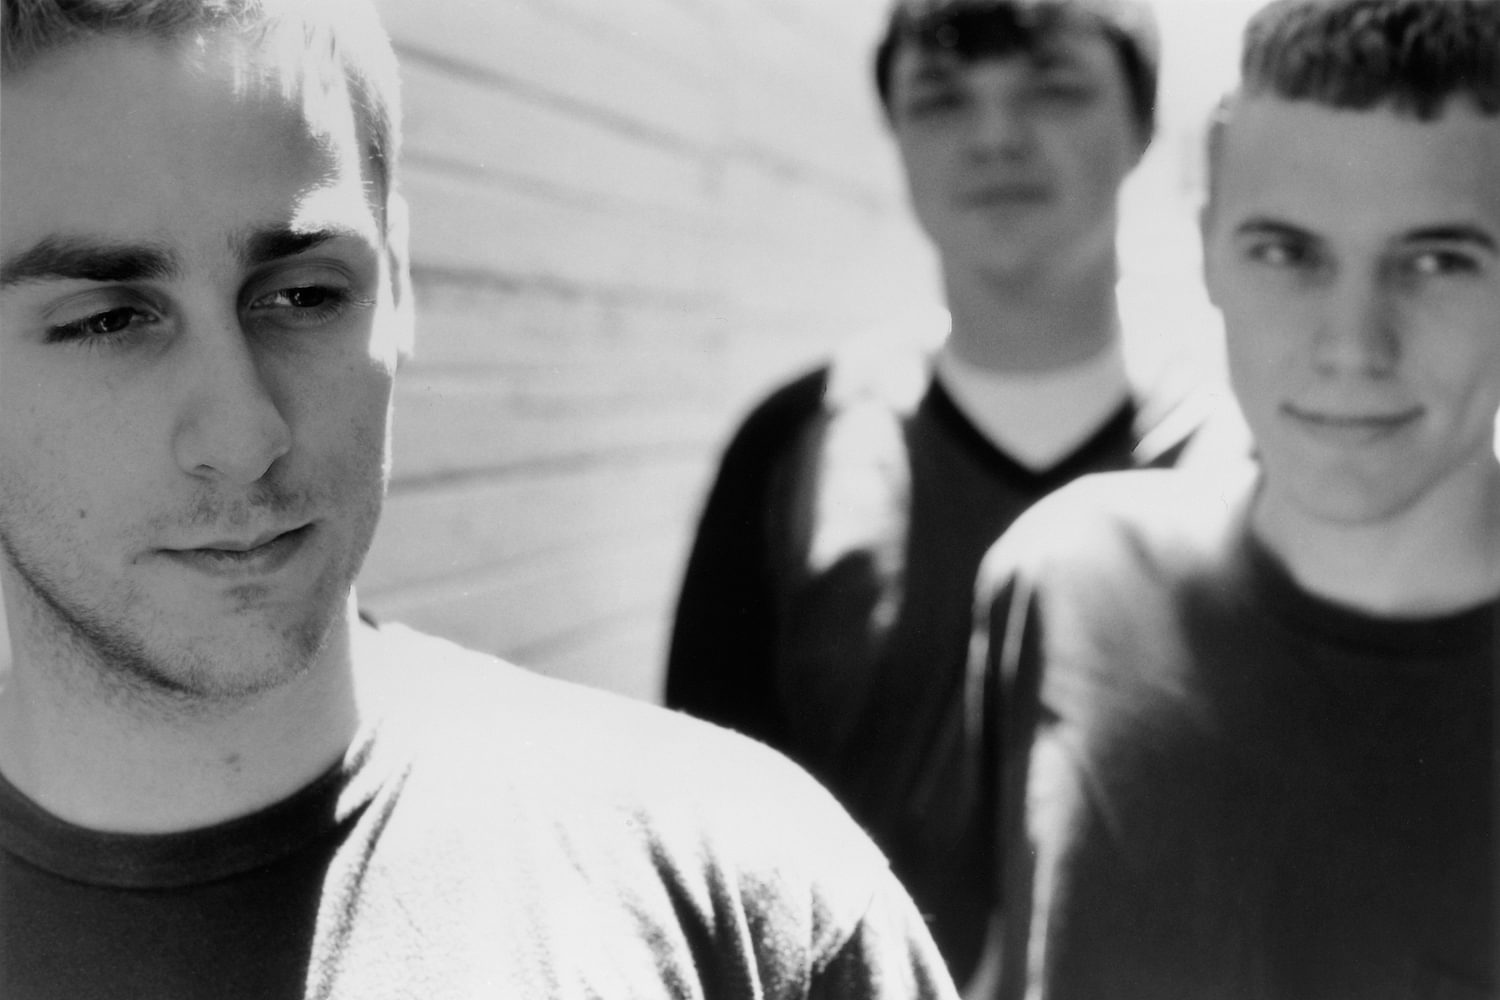 American Football reclaim their throne: “Reunion? We never did this first time around!”